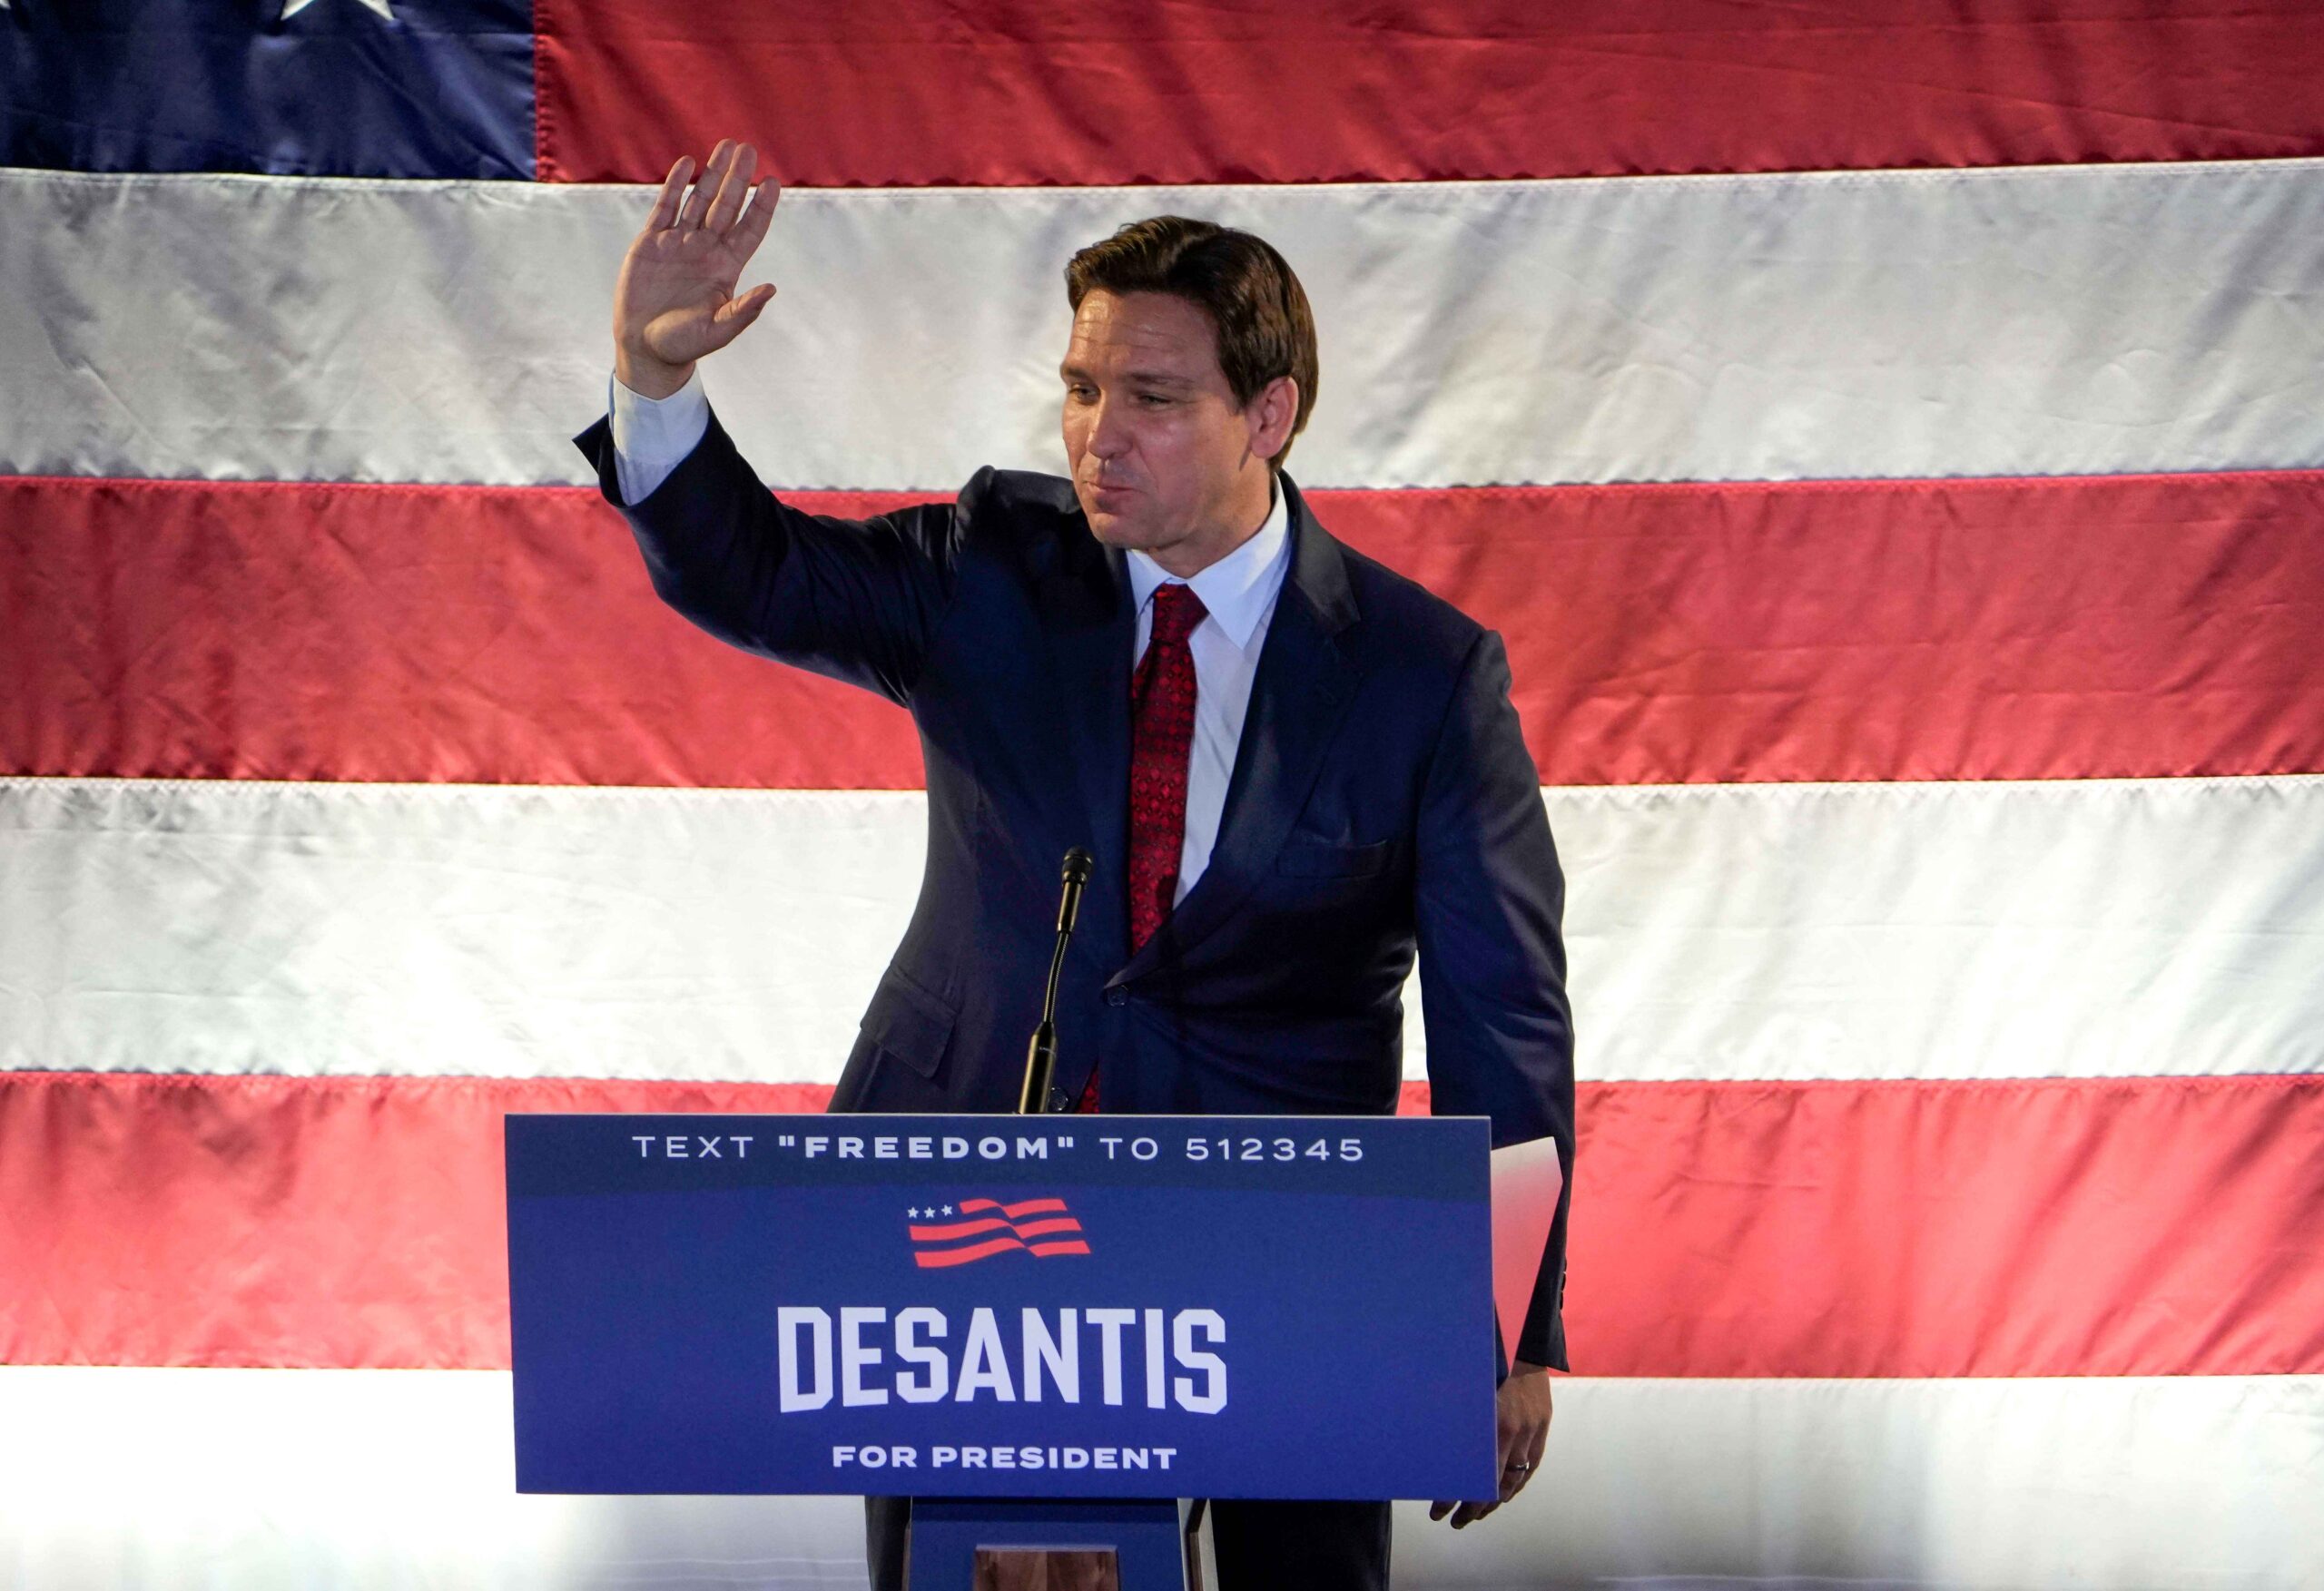 Ron DeSantis' Never Back Down PAC fired interim CEO Kristin Davison 9 days after appointing her, marking the latest high-profile staffing change for the group. (AP Photo/Bryon Houlgrave)